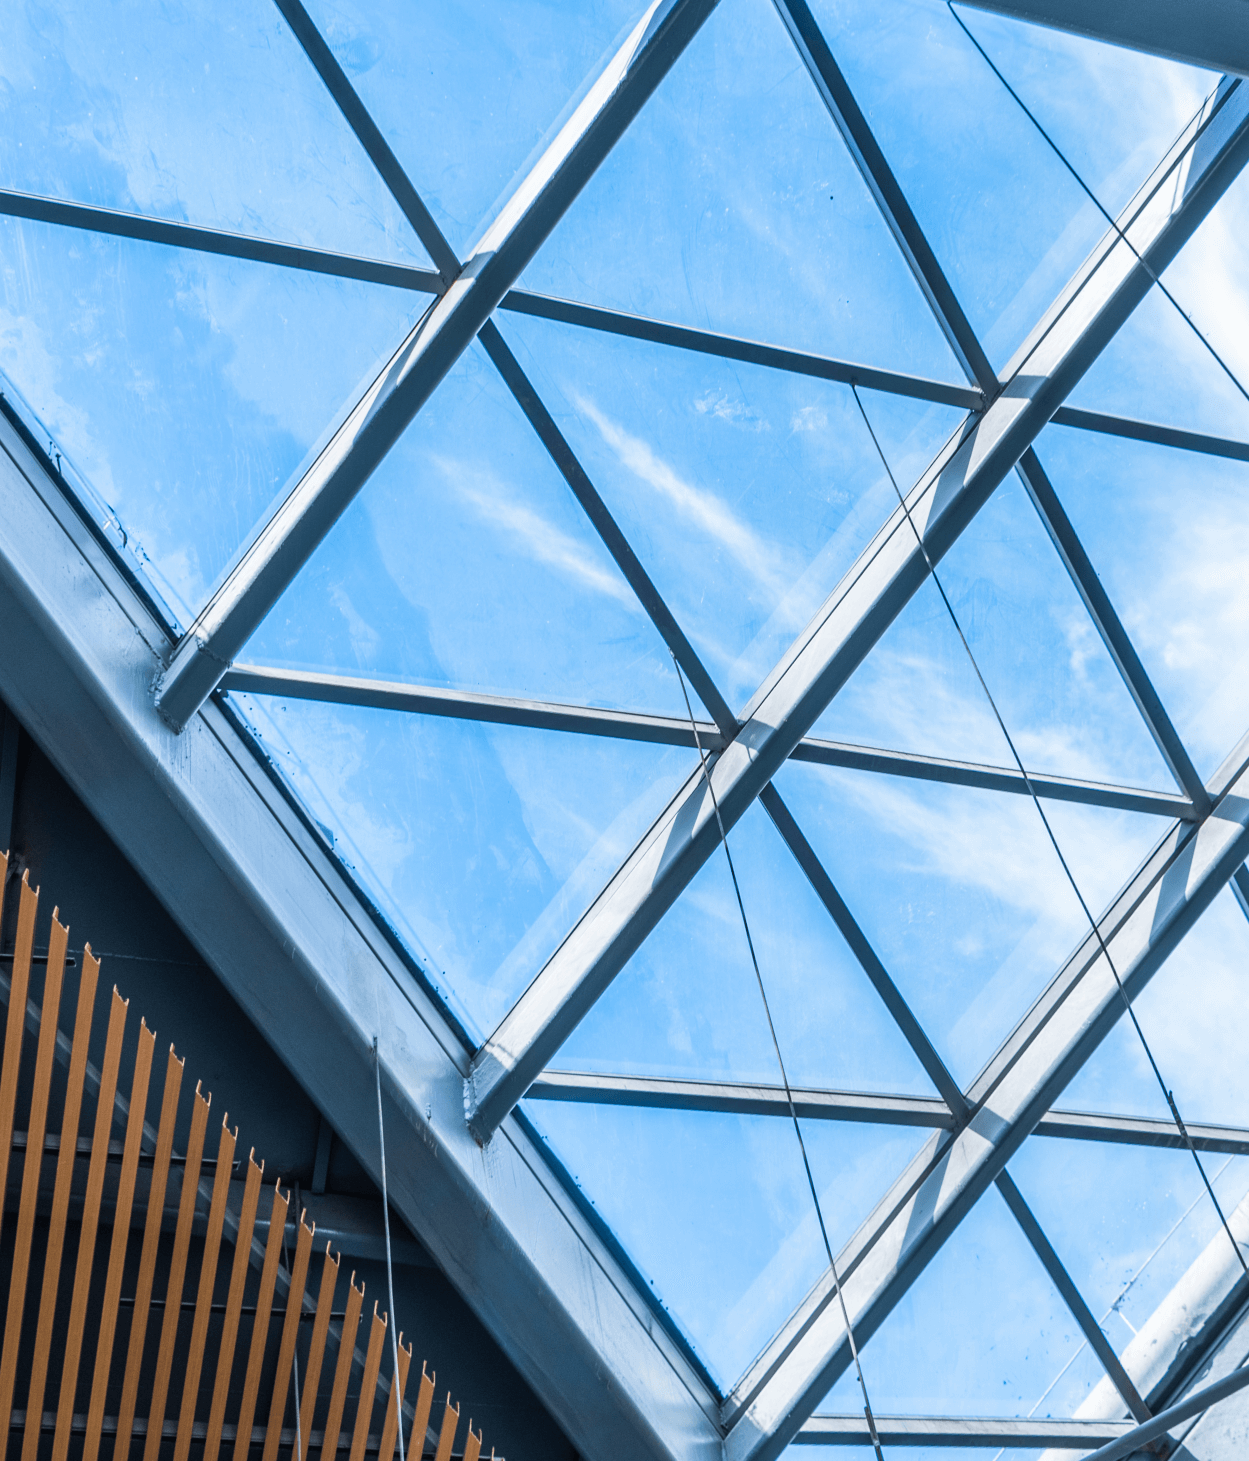 photo of a low angle view of glass ceiling with metal muntin bars.